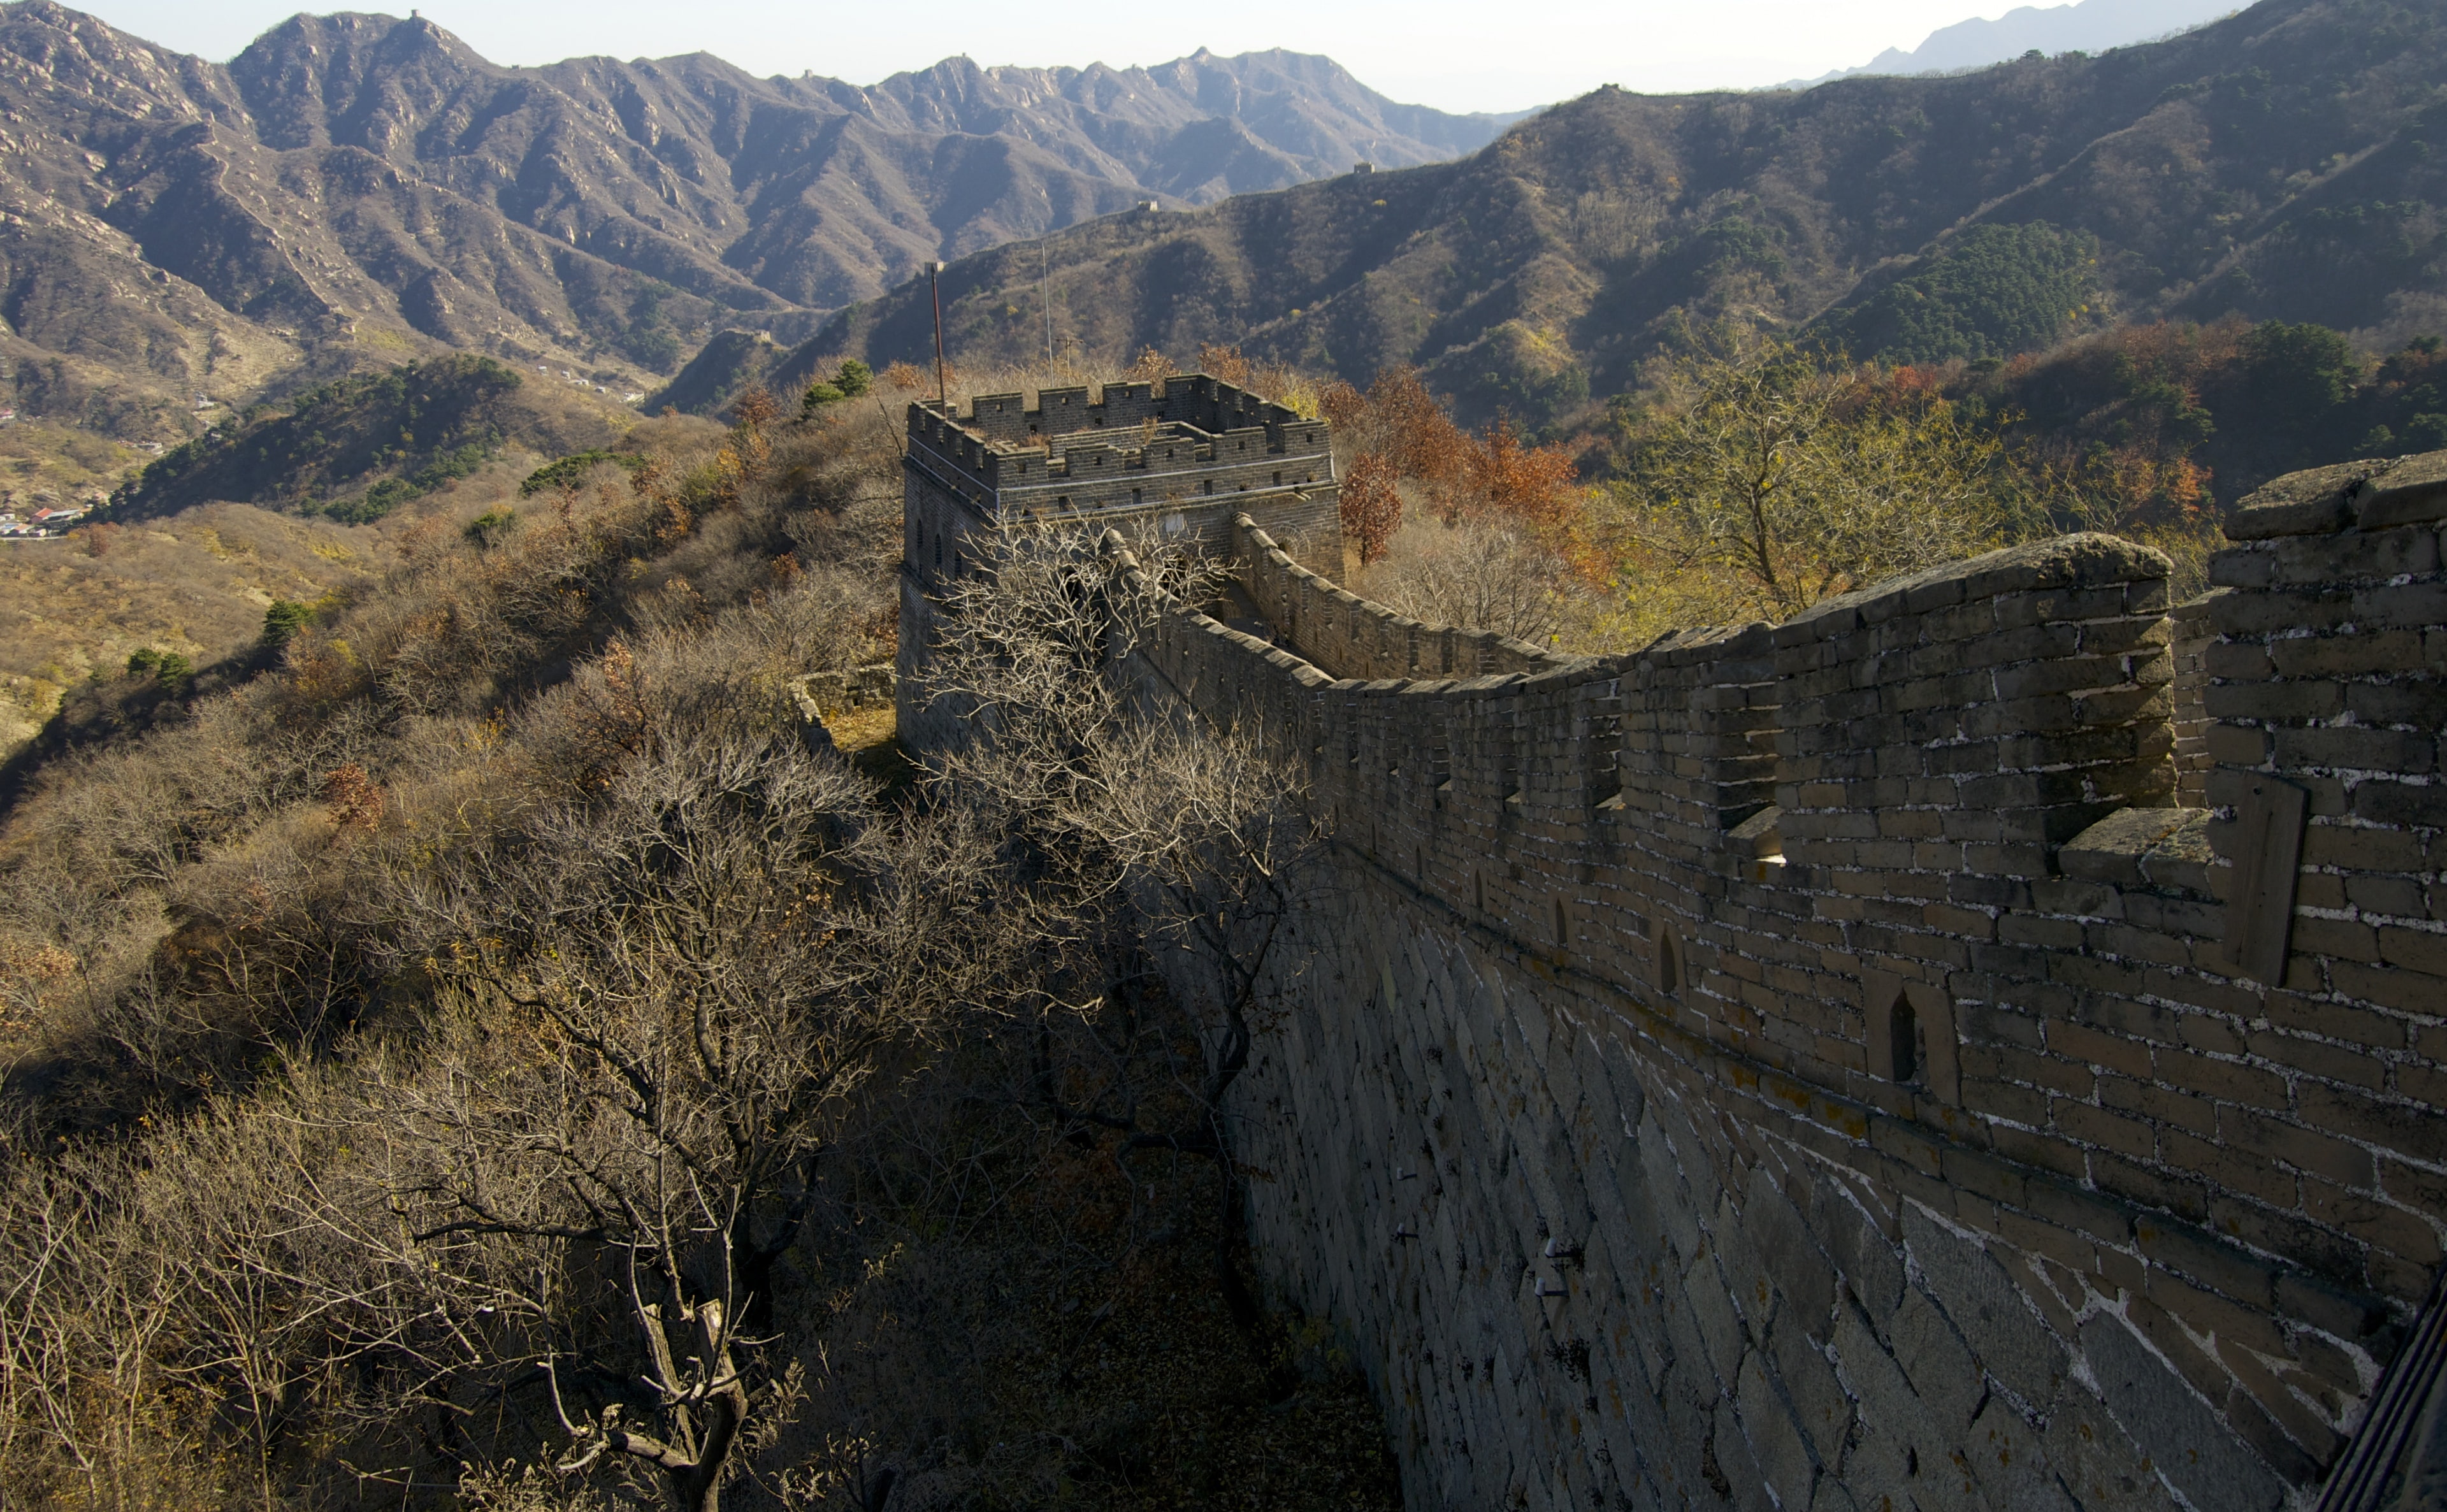 Beijing Great Wall 3, Asia, China, mountain, architecture, built structure